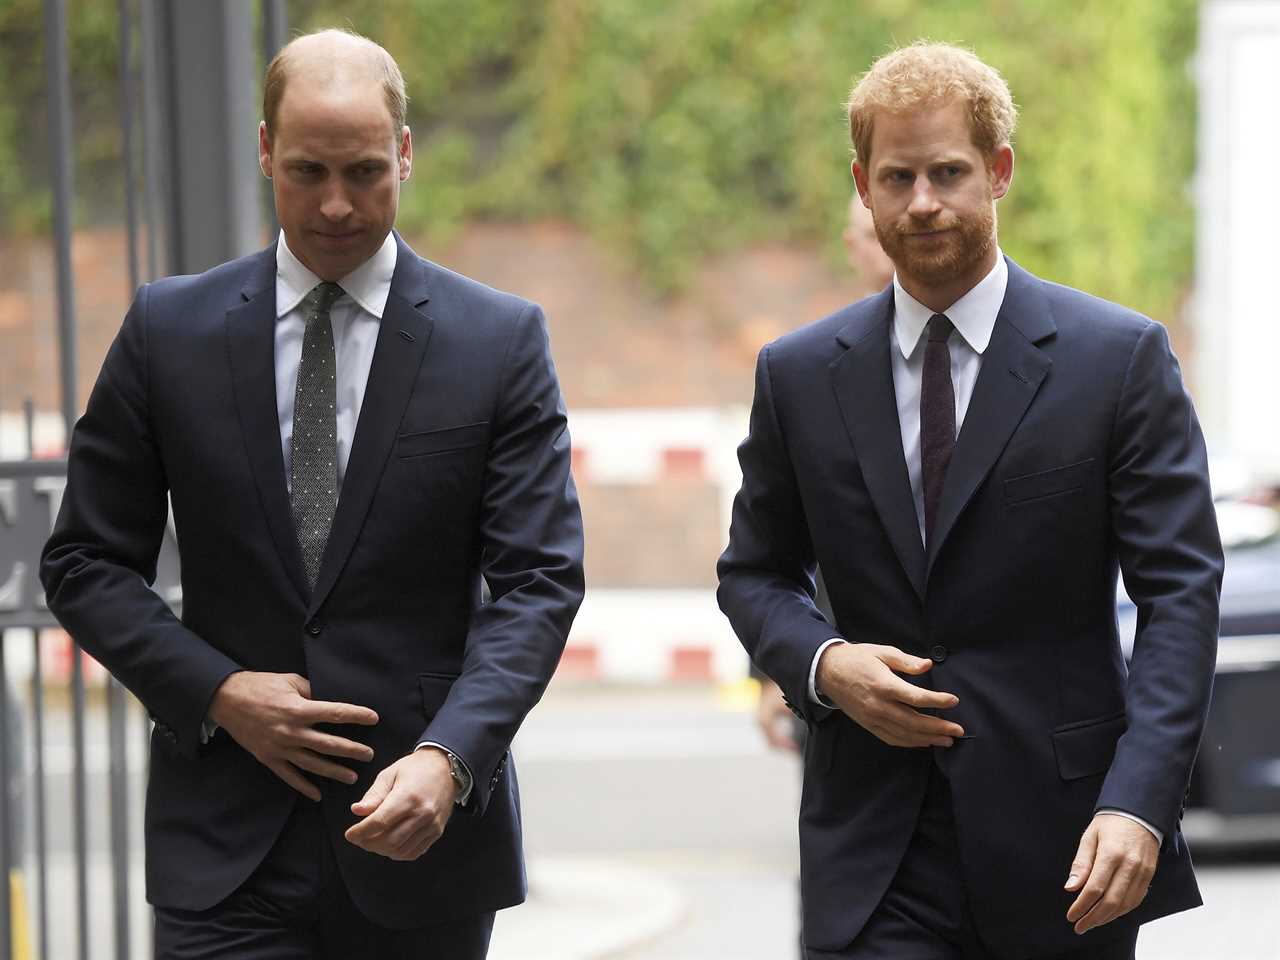 Prince William’s ‘temporary truce’ with his brother will last until Harry publishes his memoir, royal insiders claim